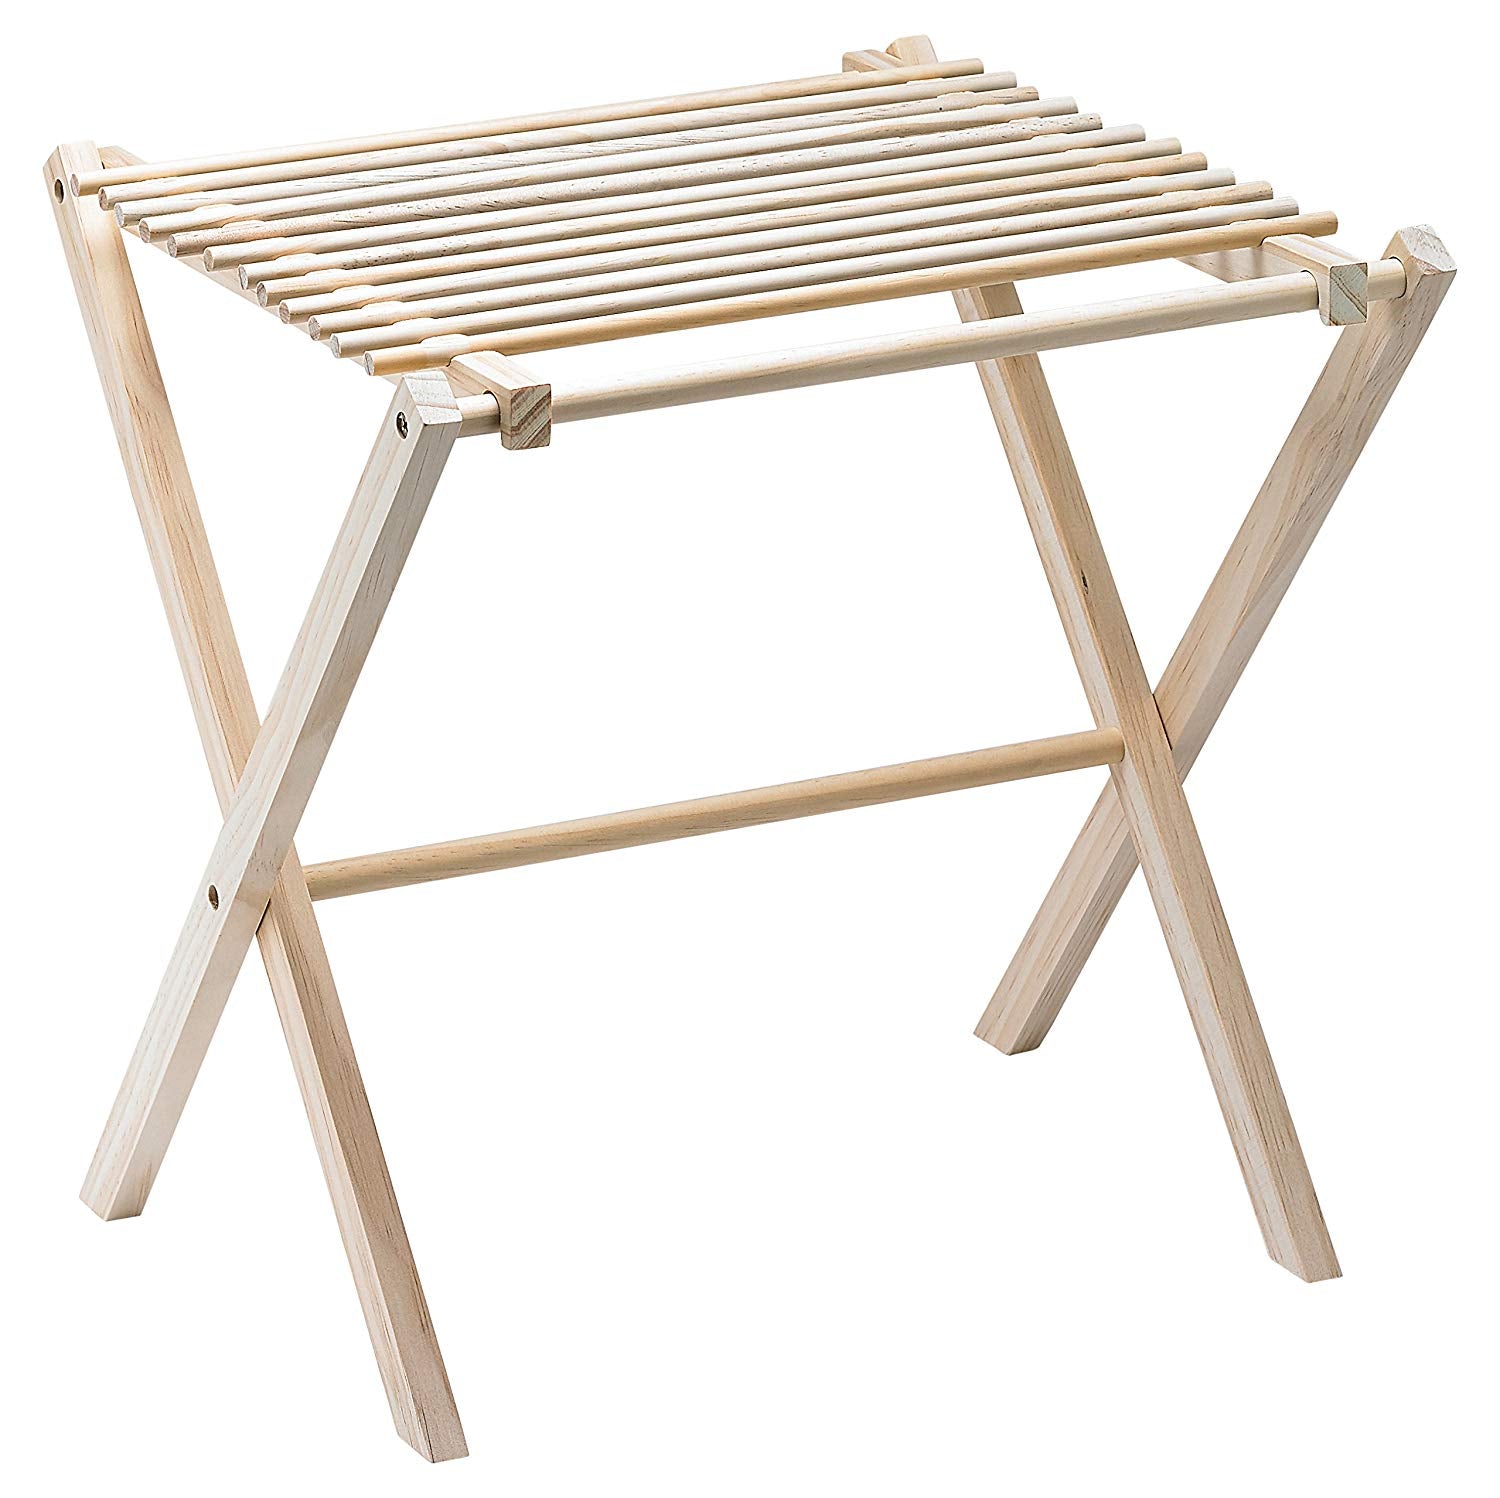 Fante's 43797 Collapsible Pasta and Noodle Drying Rack, Natural Wood, 14.5 x 16 x 15-Inches, The Italian Market Original Since 1906